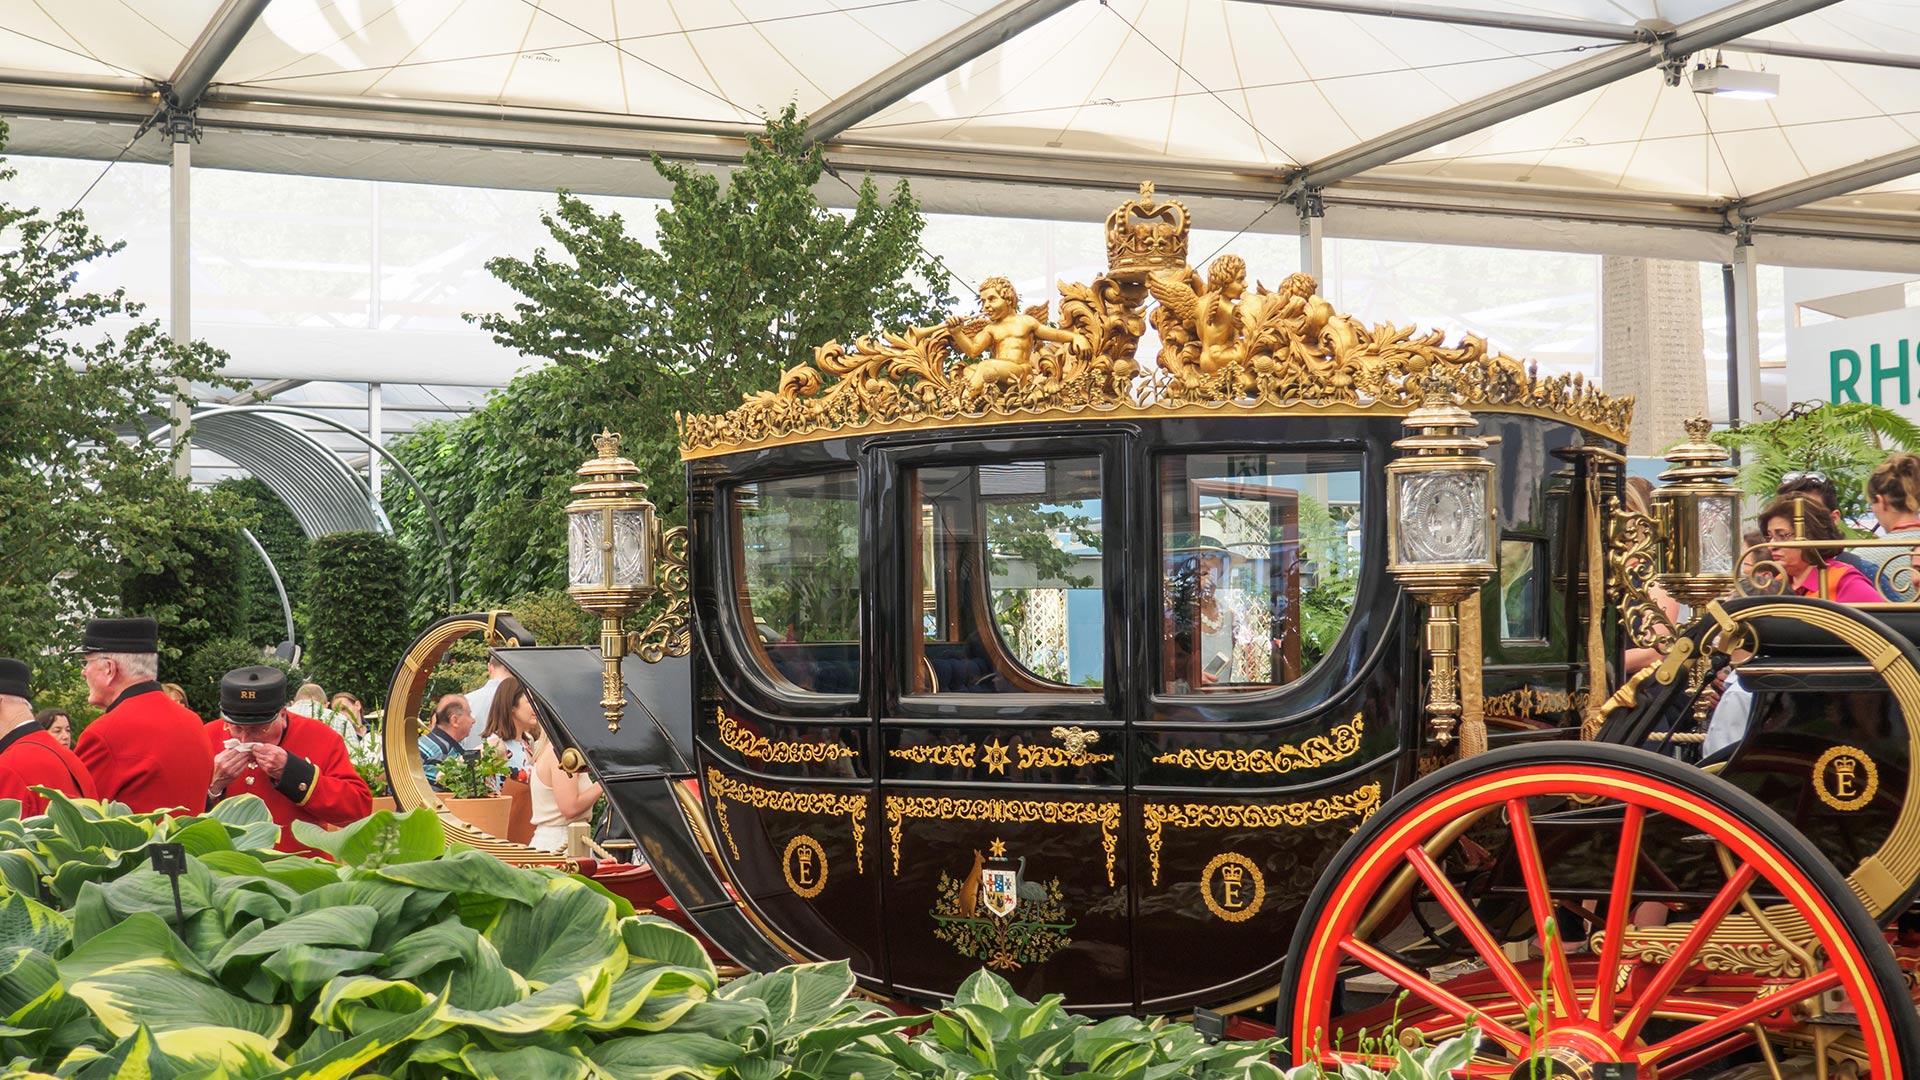 Coach Trips To RHS Chelsea Flower Show Book A Day Trip To The Chelsea